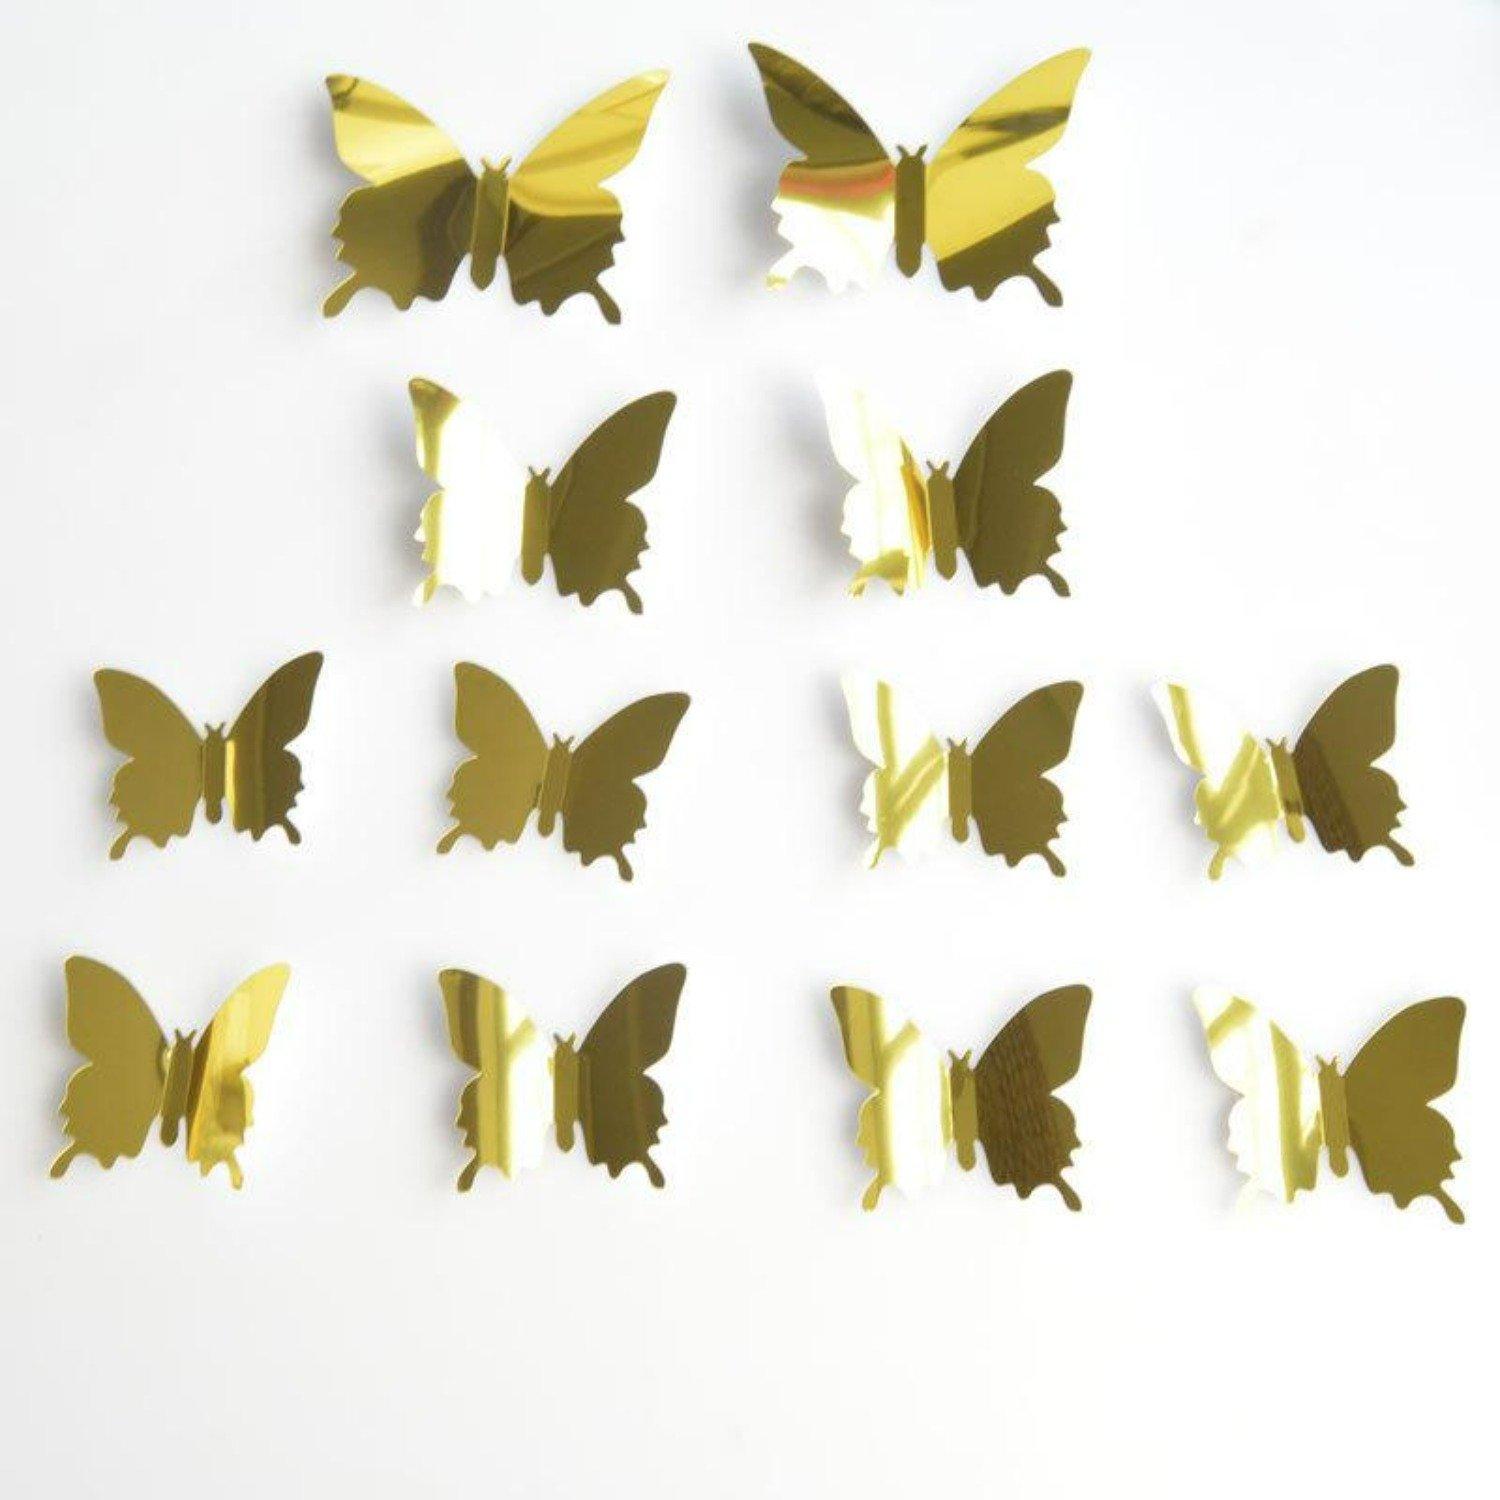 3D Butterfly Acrylic Mirror Home Decal Sticker Pack - StiCool